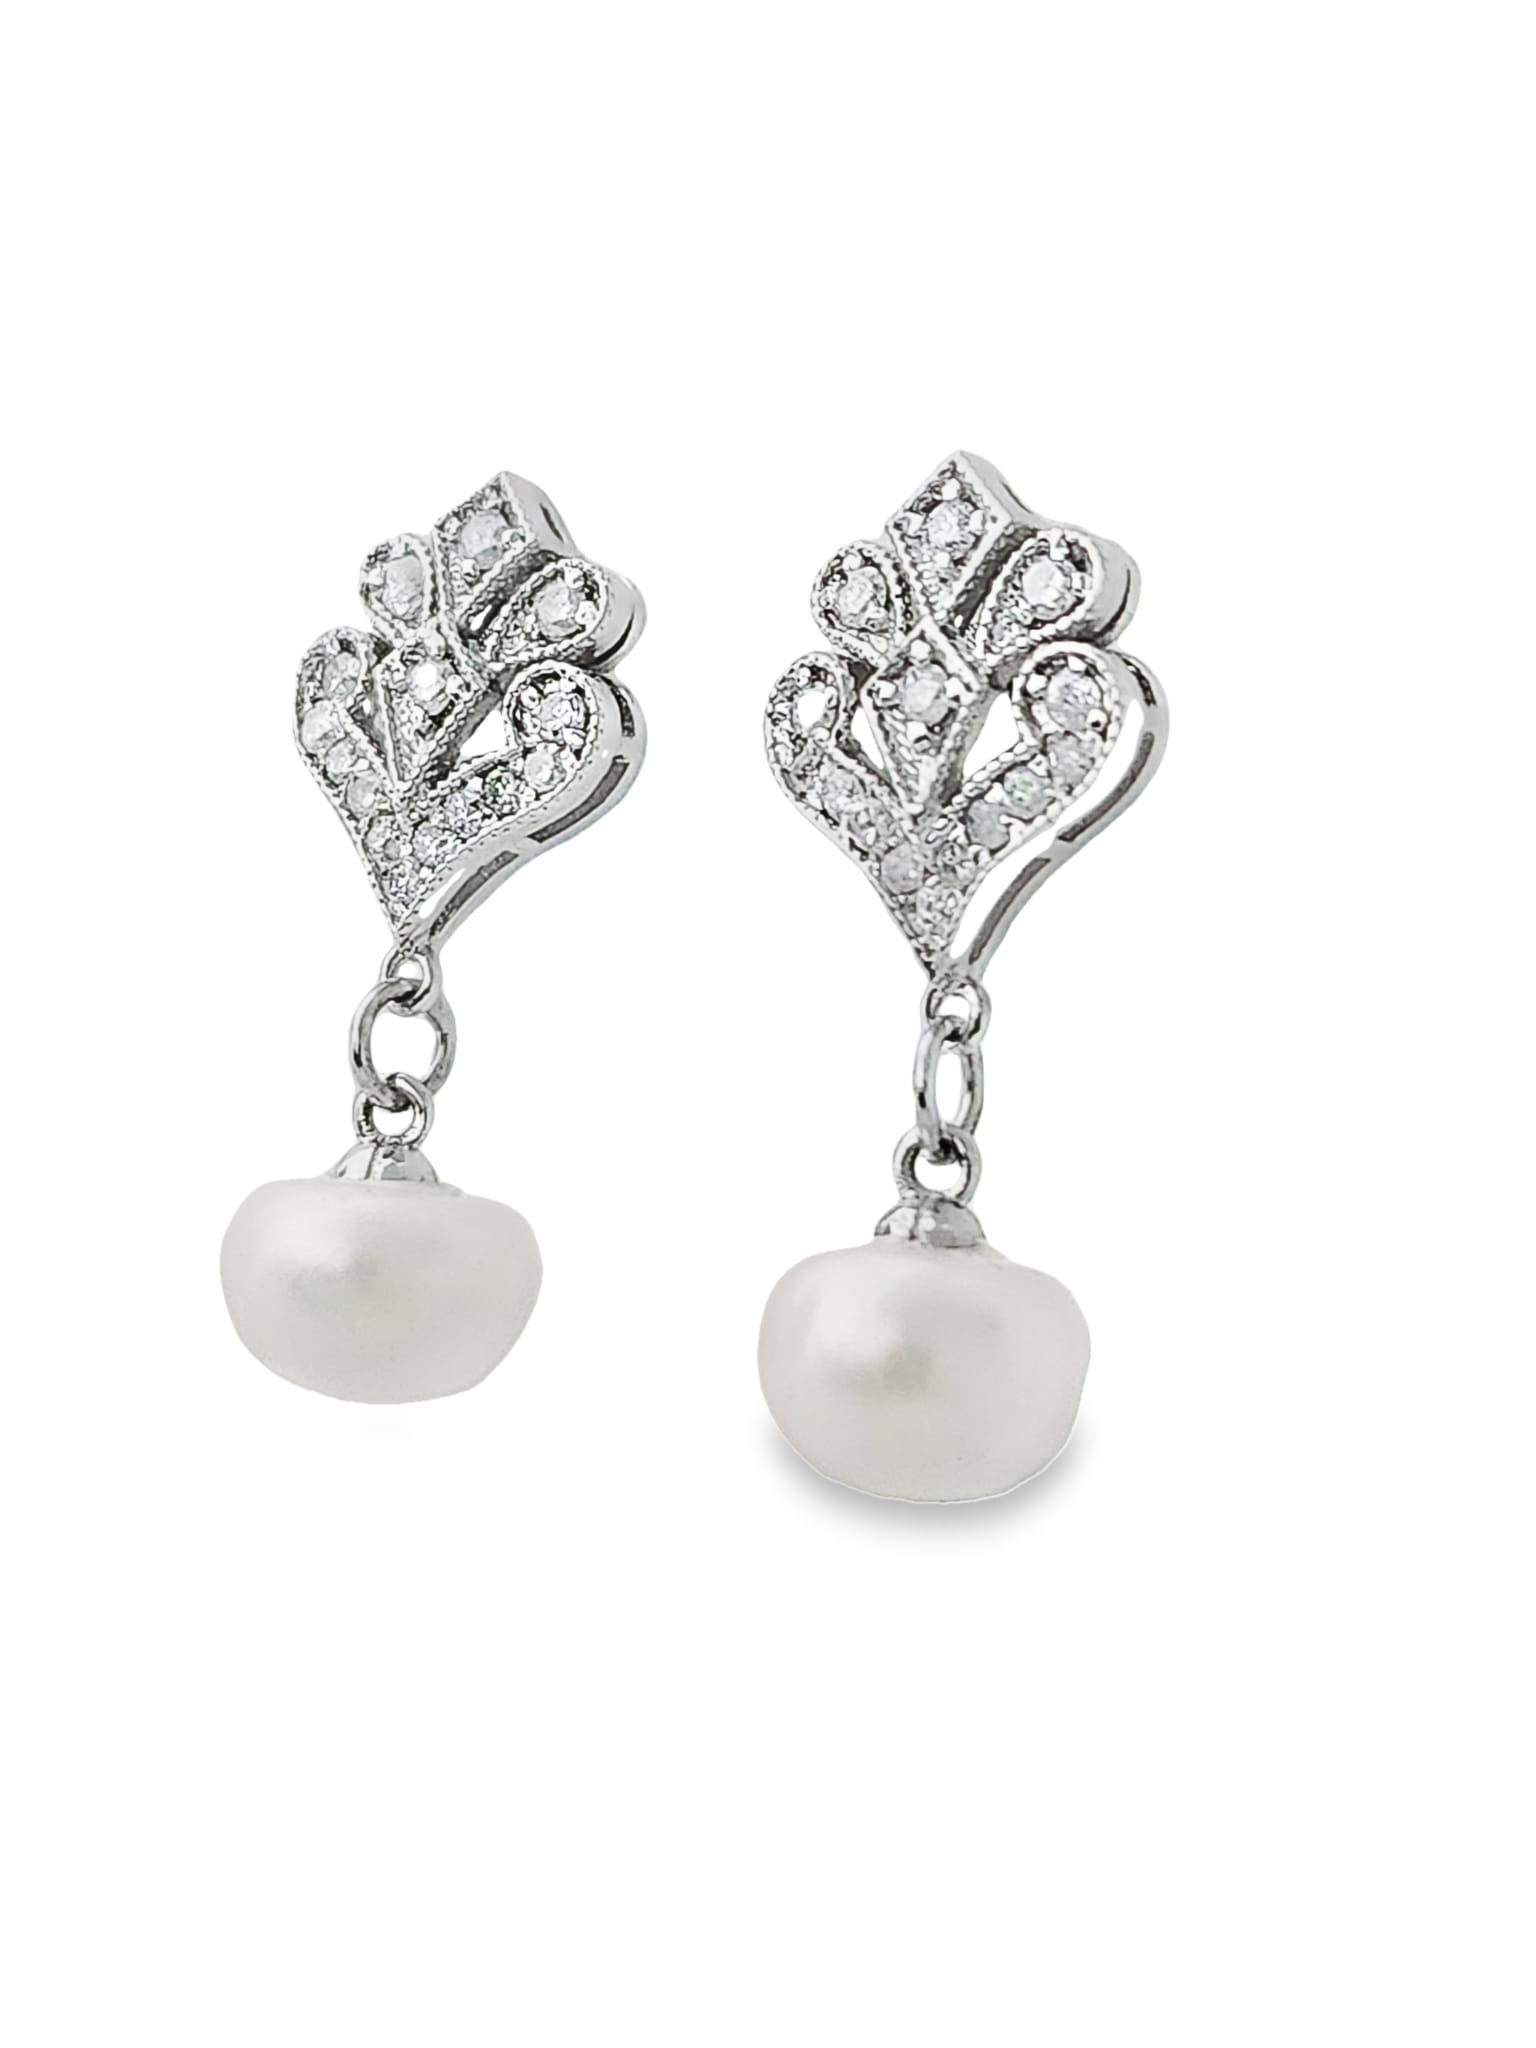 A pair of beautiful pearl earrings.
The earrings are made of 14K white gold and each earring is set with natural Diamonds and round pearl.
The pearls Color: White.
Each earring is set with 15 natural diamonds, a total of 30 natural diamonds with a